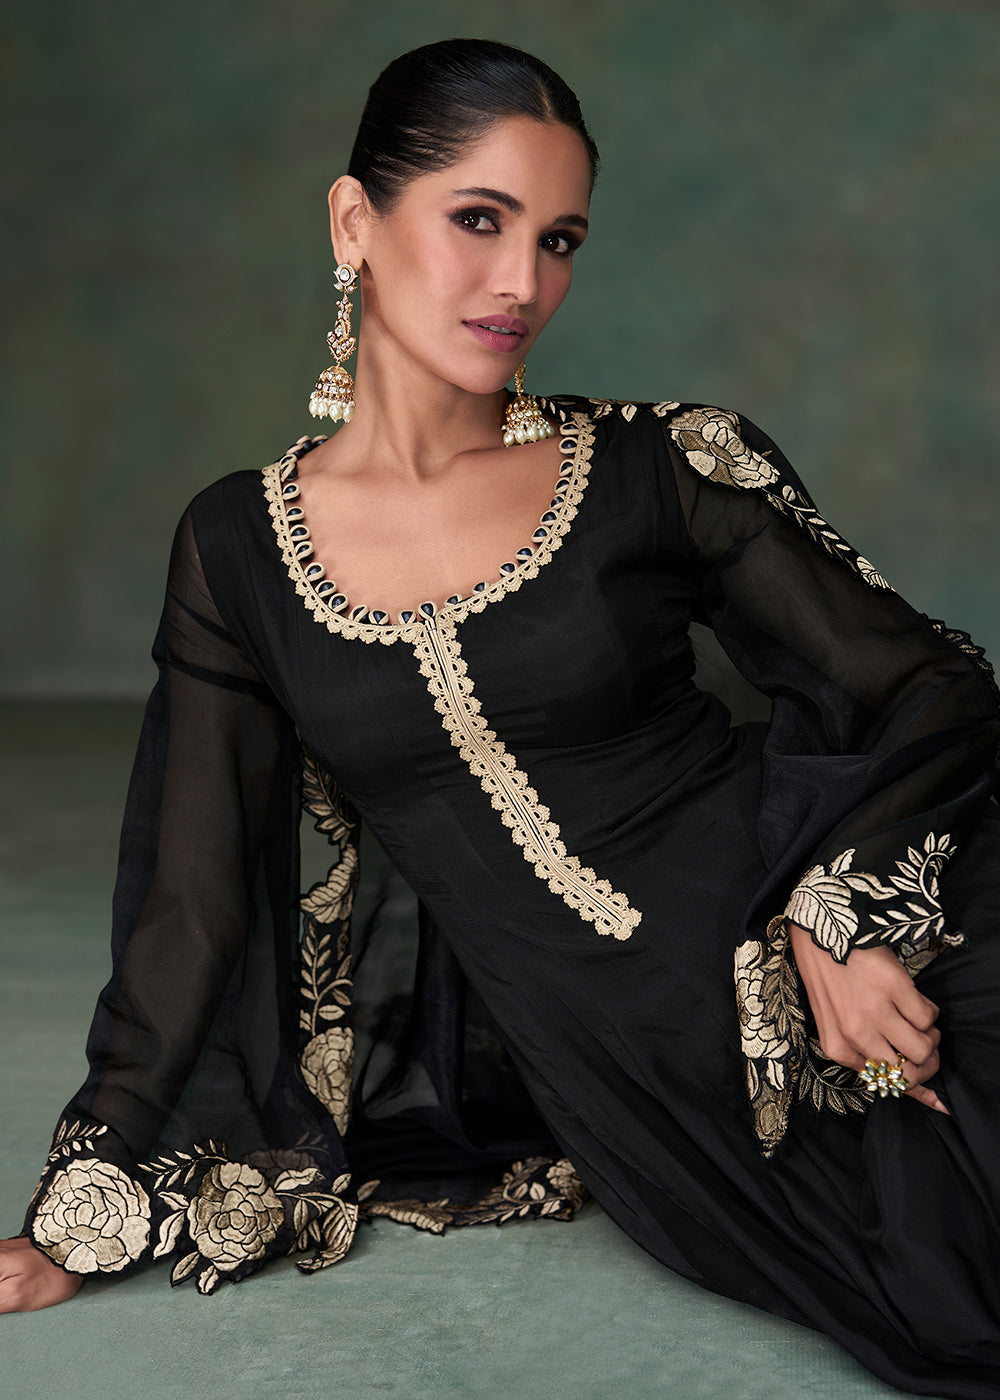 Buy Now Pure Silk Black Embroidered Reception Wear Indian Gown Online in USA, UK, Australia, Canada & Worldwide at Empress Clothing.